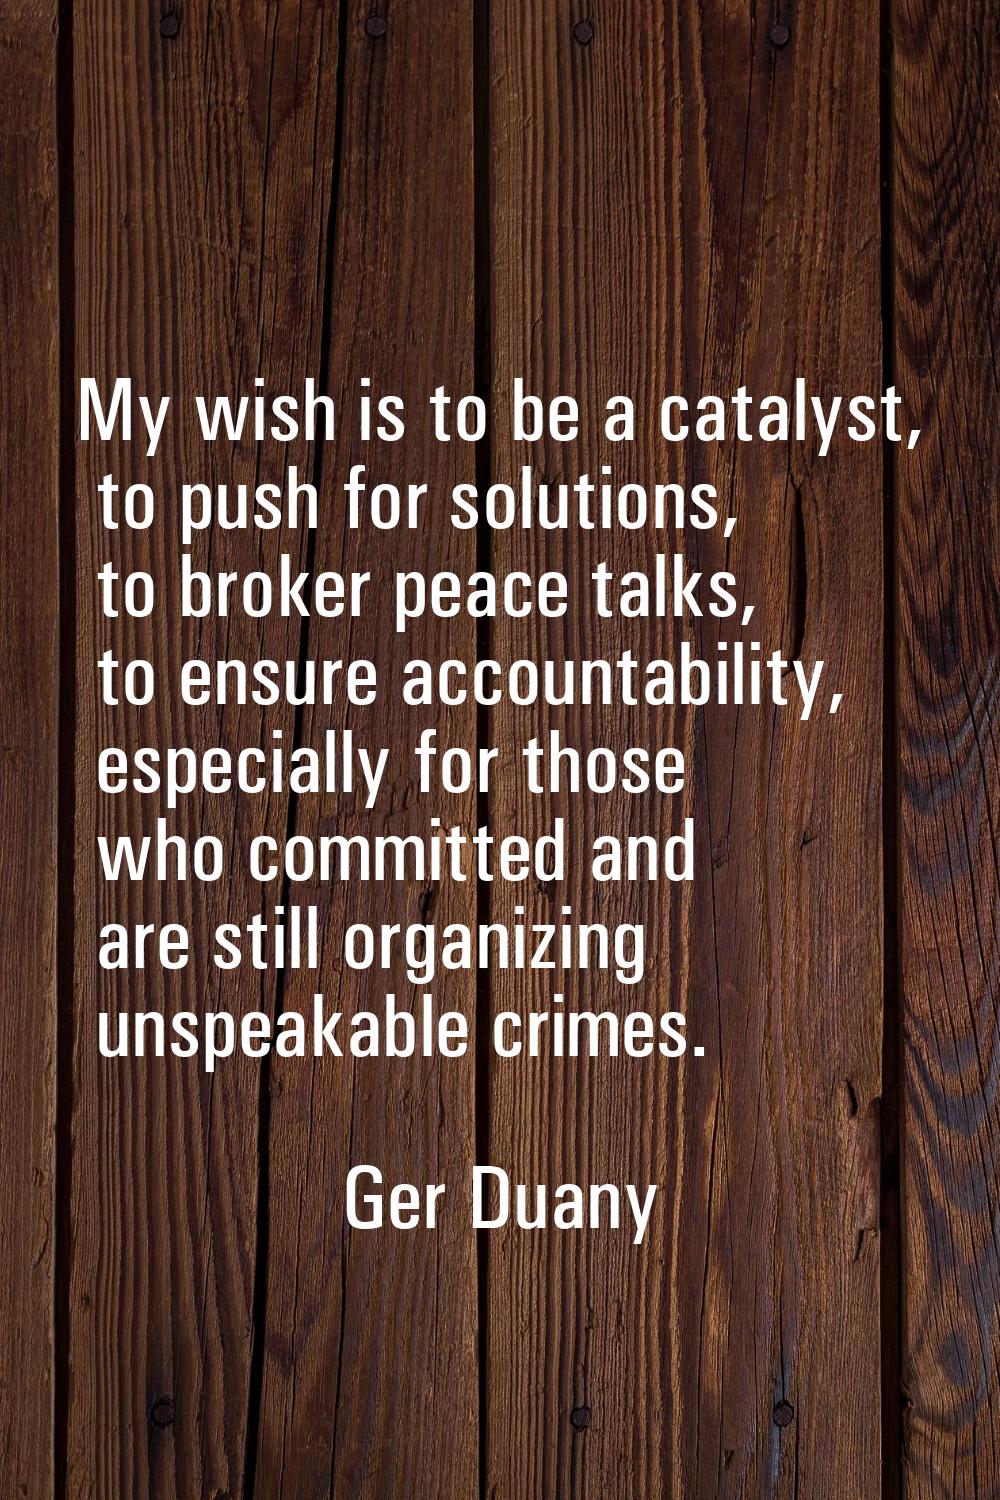 My wish is to be a catalyst, to push for solutions, to broker peace talks, to ensure accountability